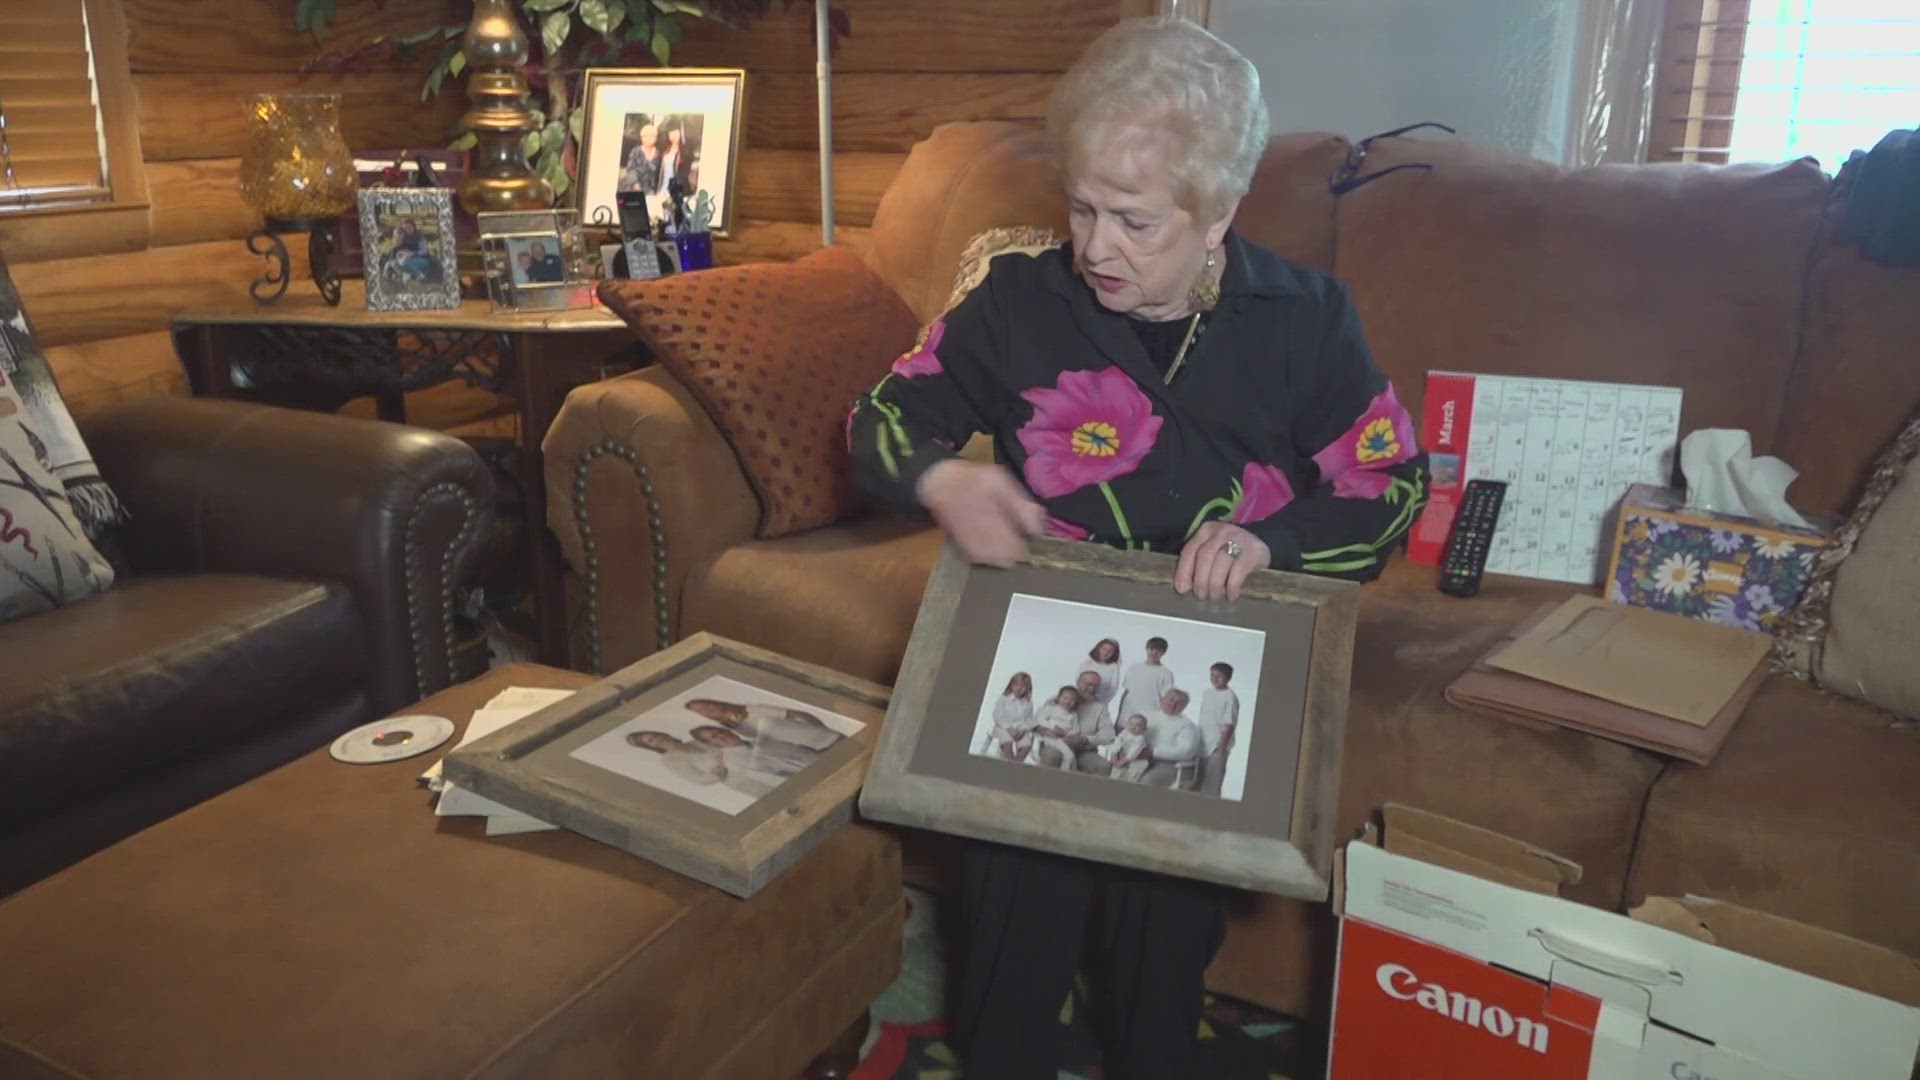 She discovered the photos at a yard sale. Now she’s searching for the owner.